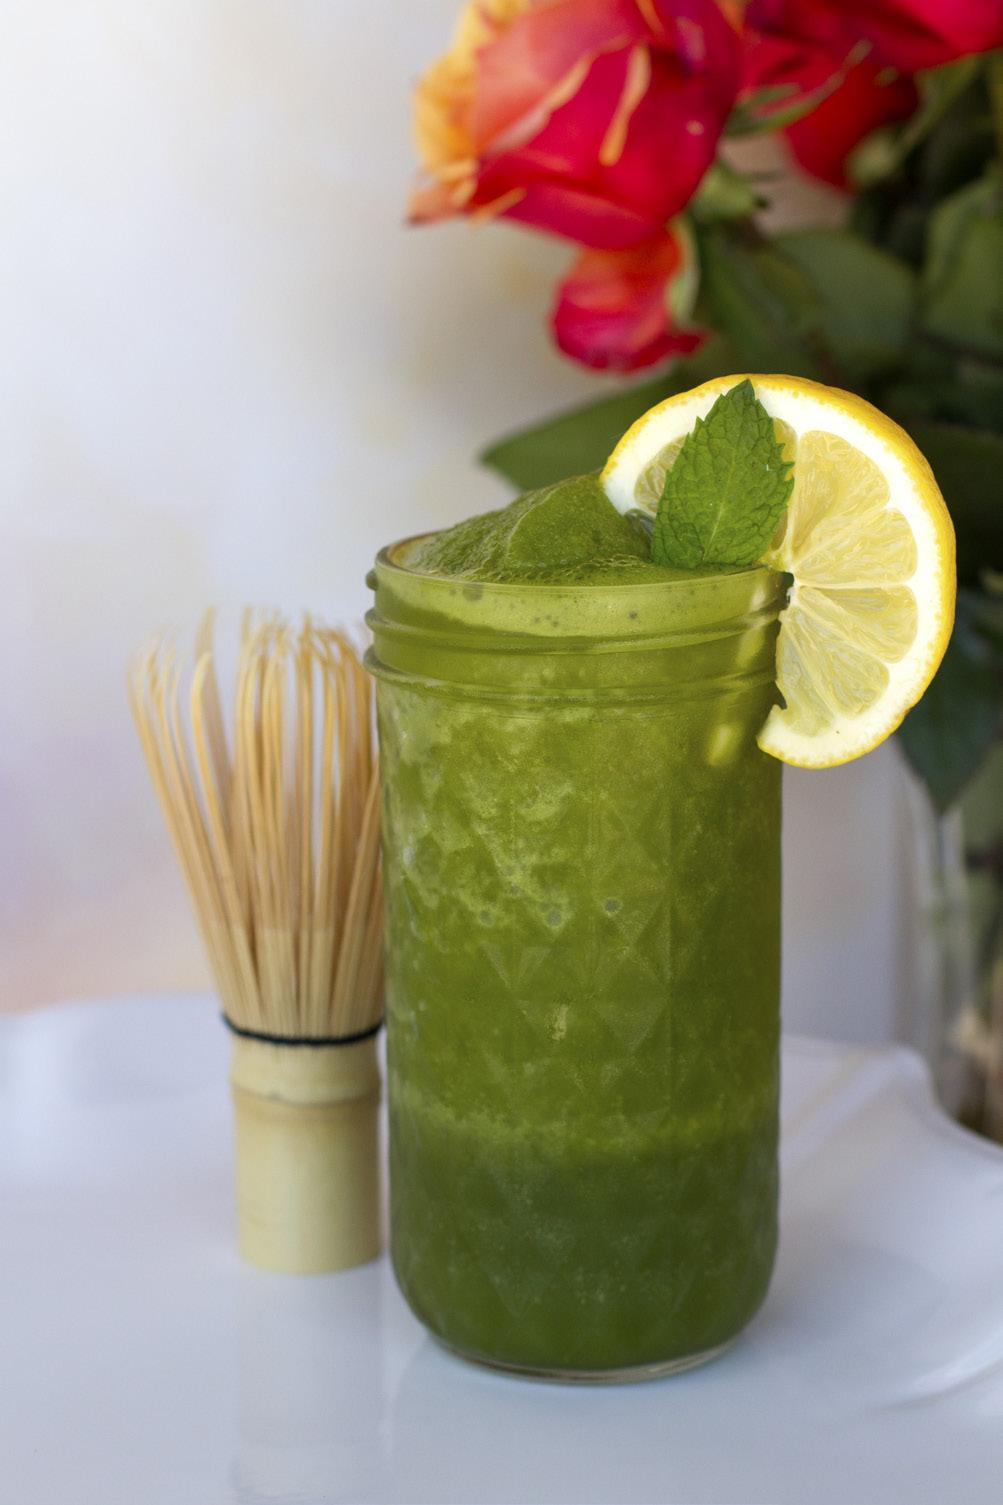 Matcha Mia Matcha Mia! Here I go again, making this drink for all my friends. Get ready to enjoy matcha tea and mint together!